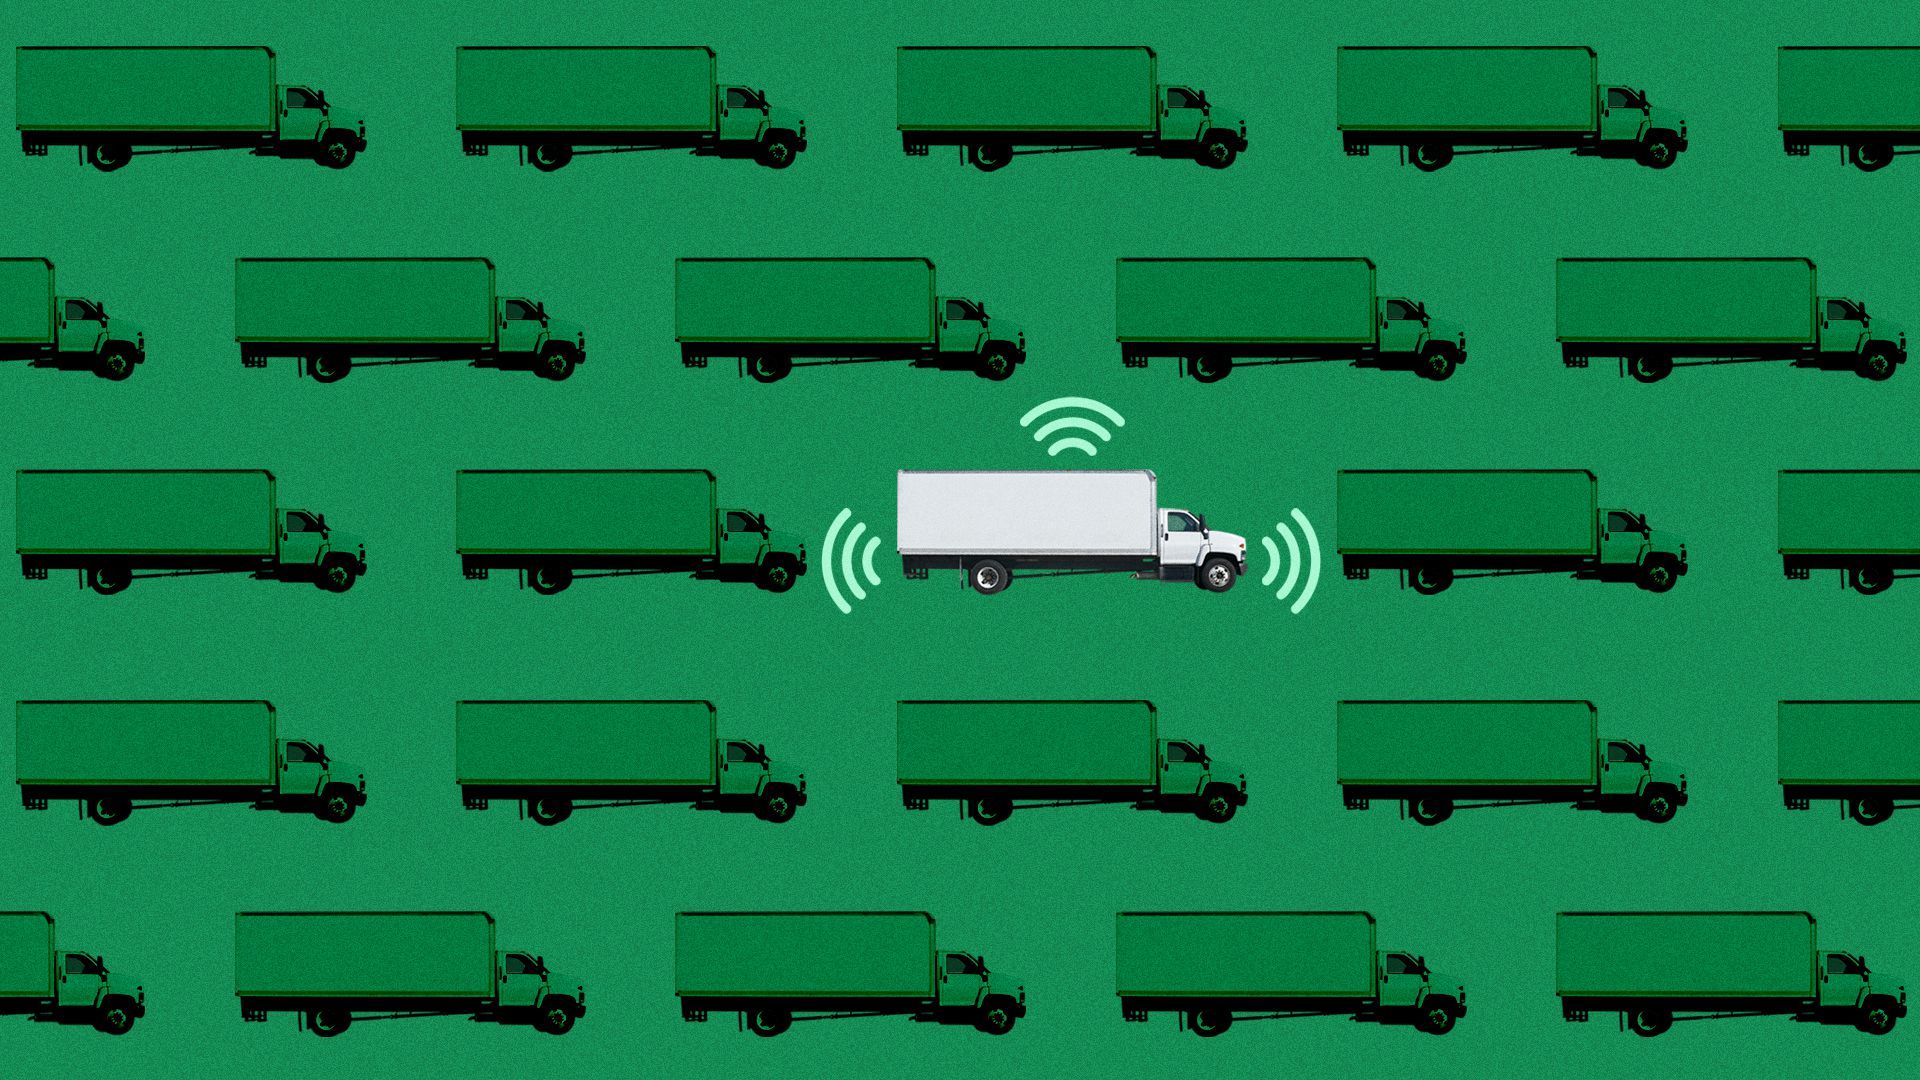 Pattern of trucks with one highlighted and radiating sensors. 